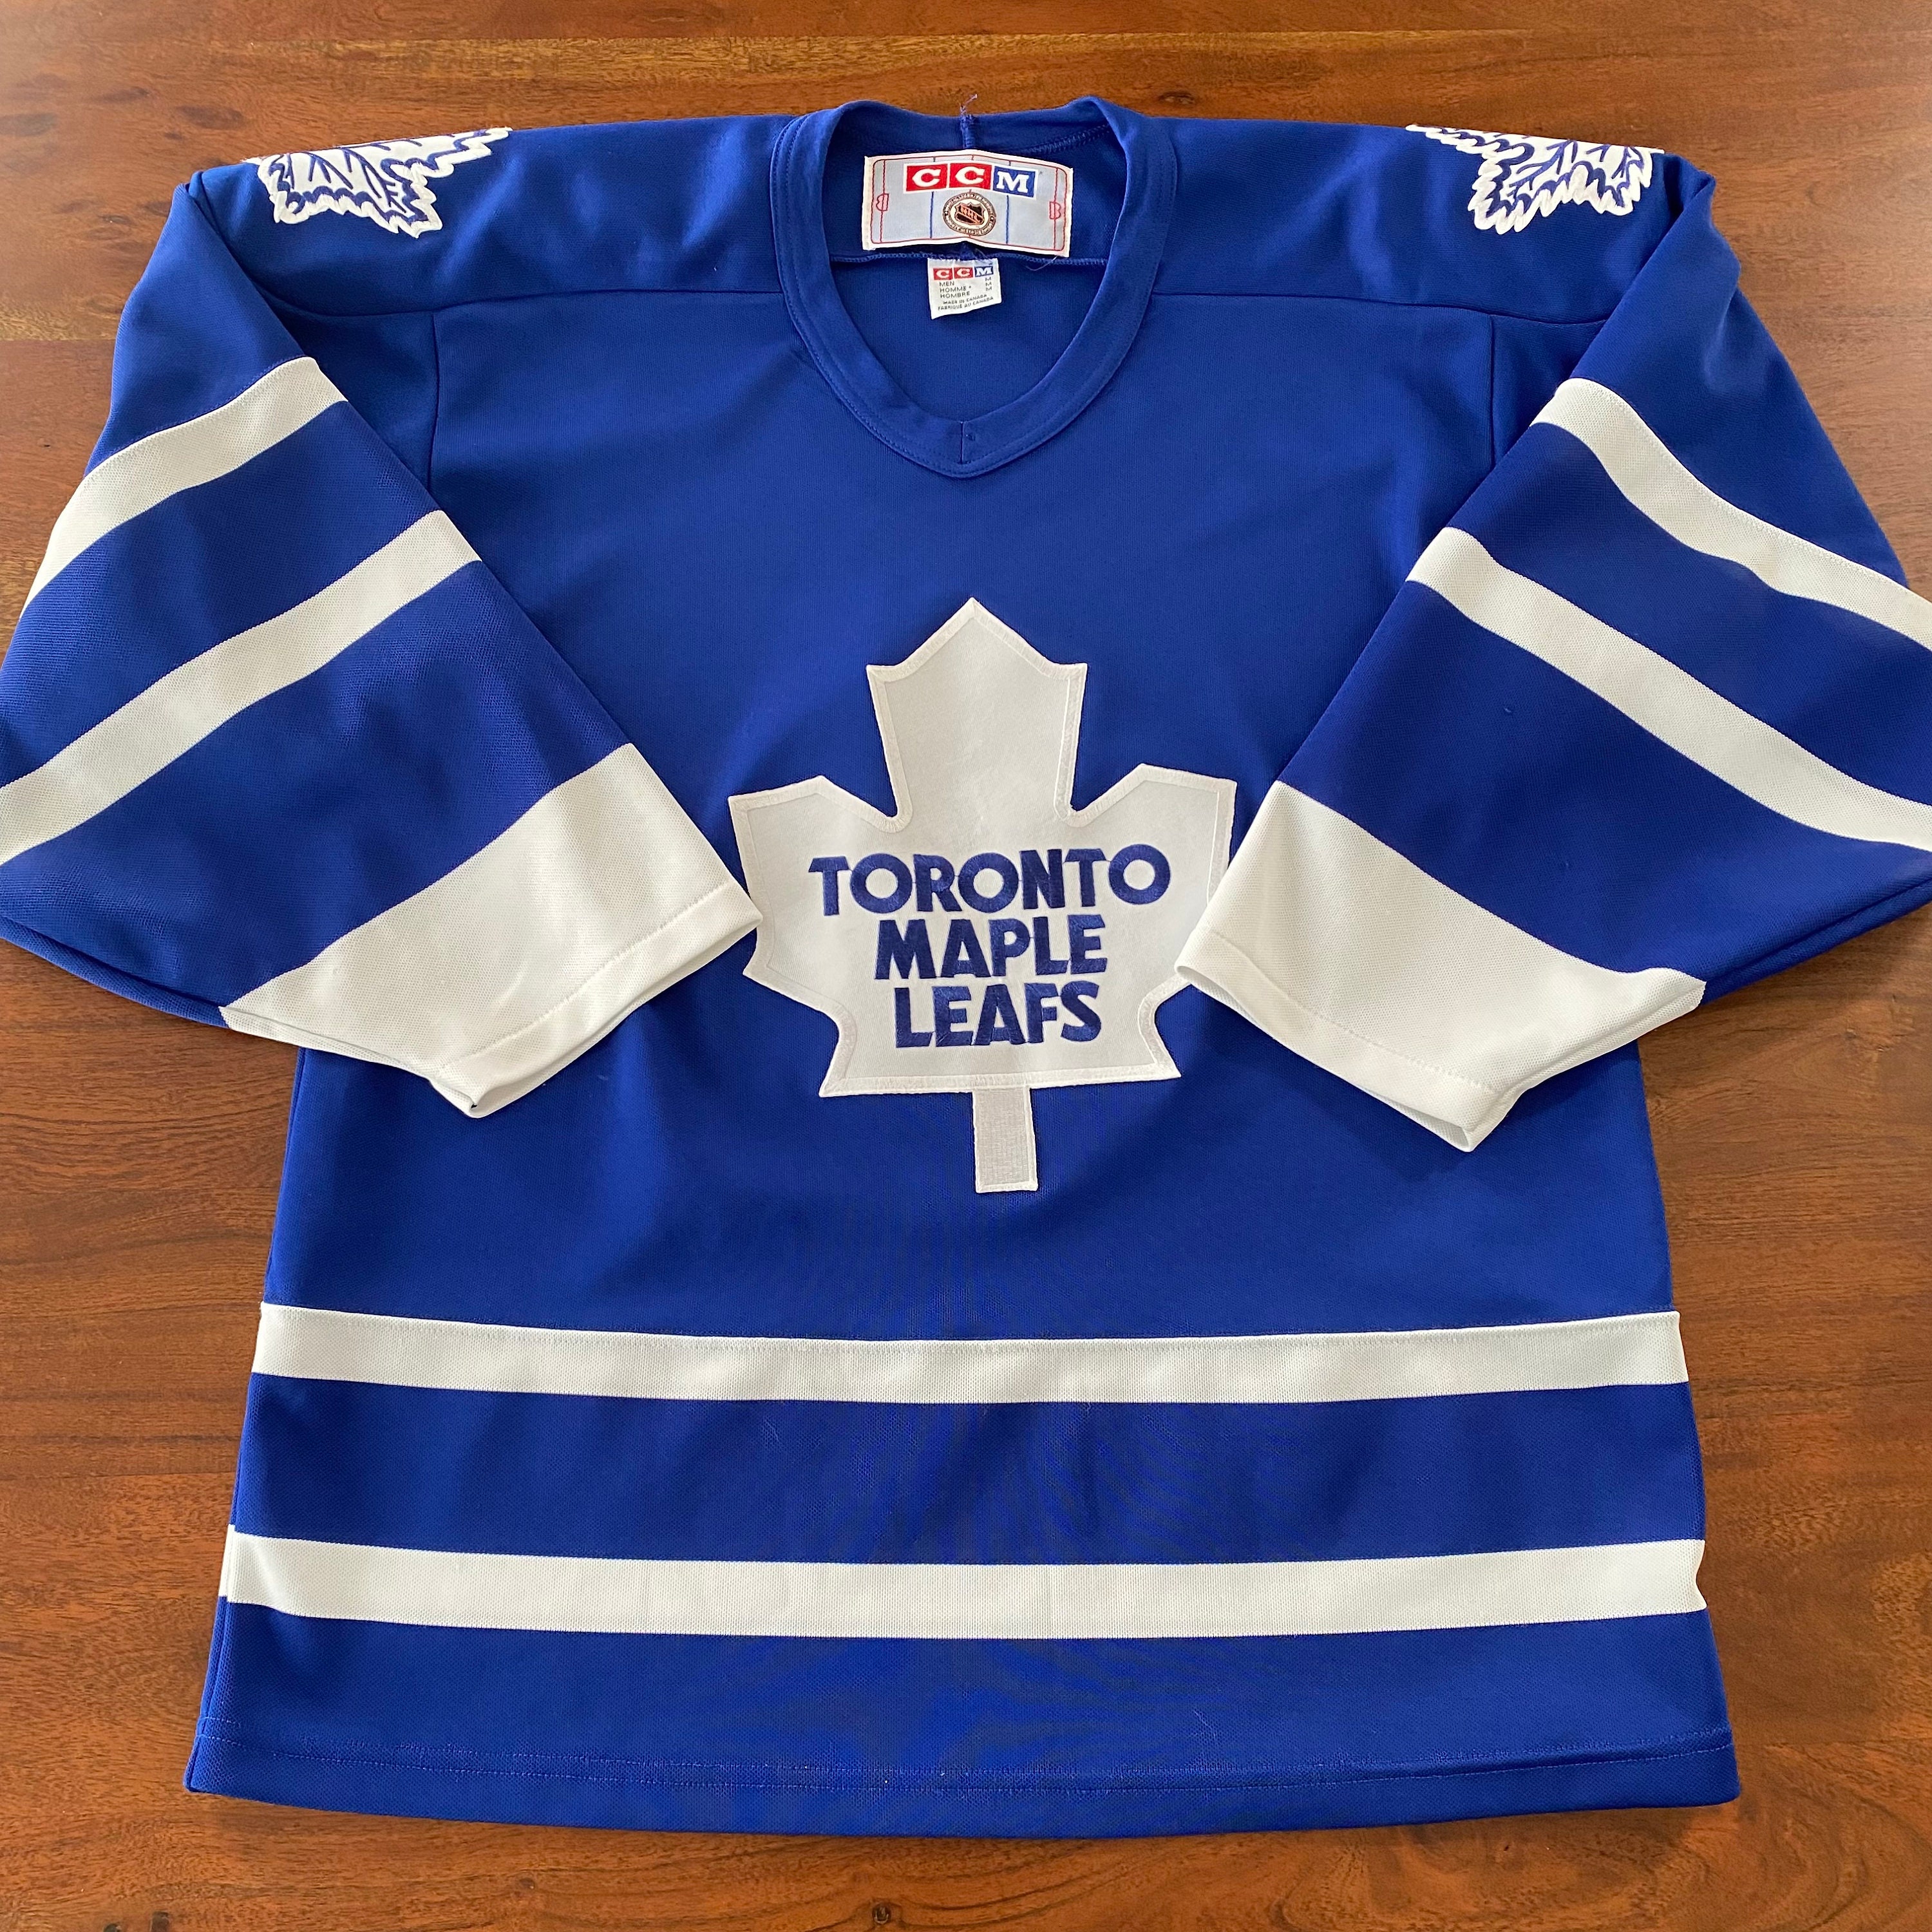 Toronto Maple Leafs Vintage CCM Hockey Jersey - Made in Canada